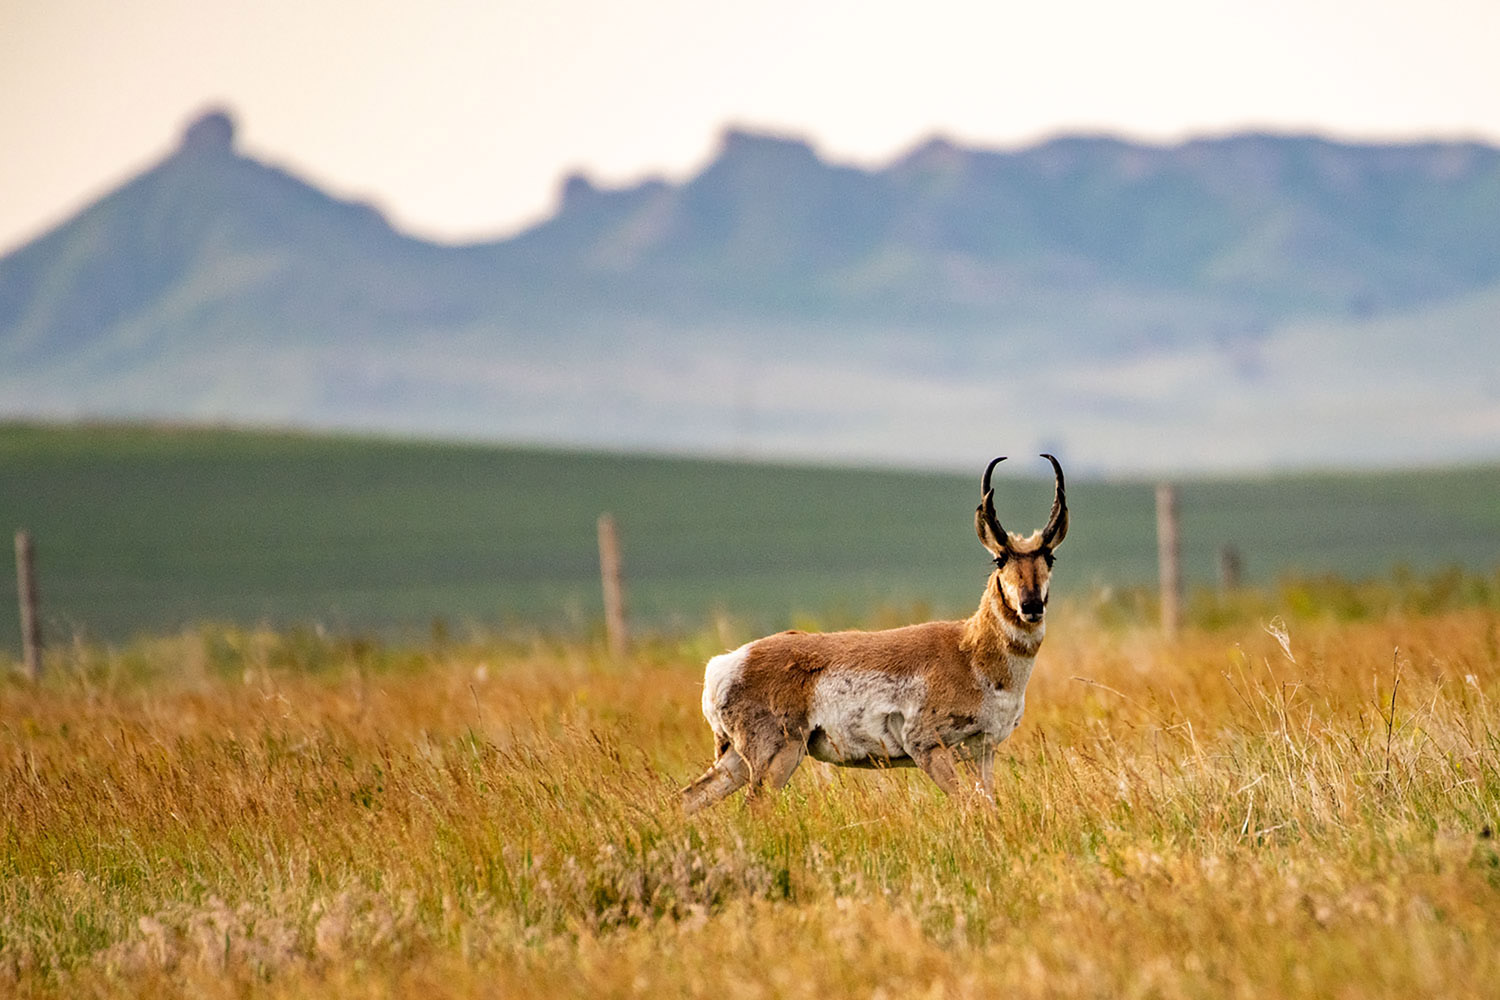 University of Nebraska researchers are partnering with the Nebraska Game and Parks Commission on a three-year project that studies pronghorn movements, migration patterns and habitat use in the Panhandle region. (Nebraskaland Magazine/Nebraska Game and Parks Commission)